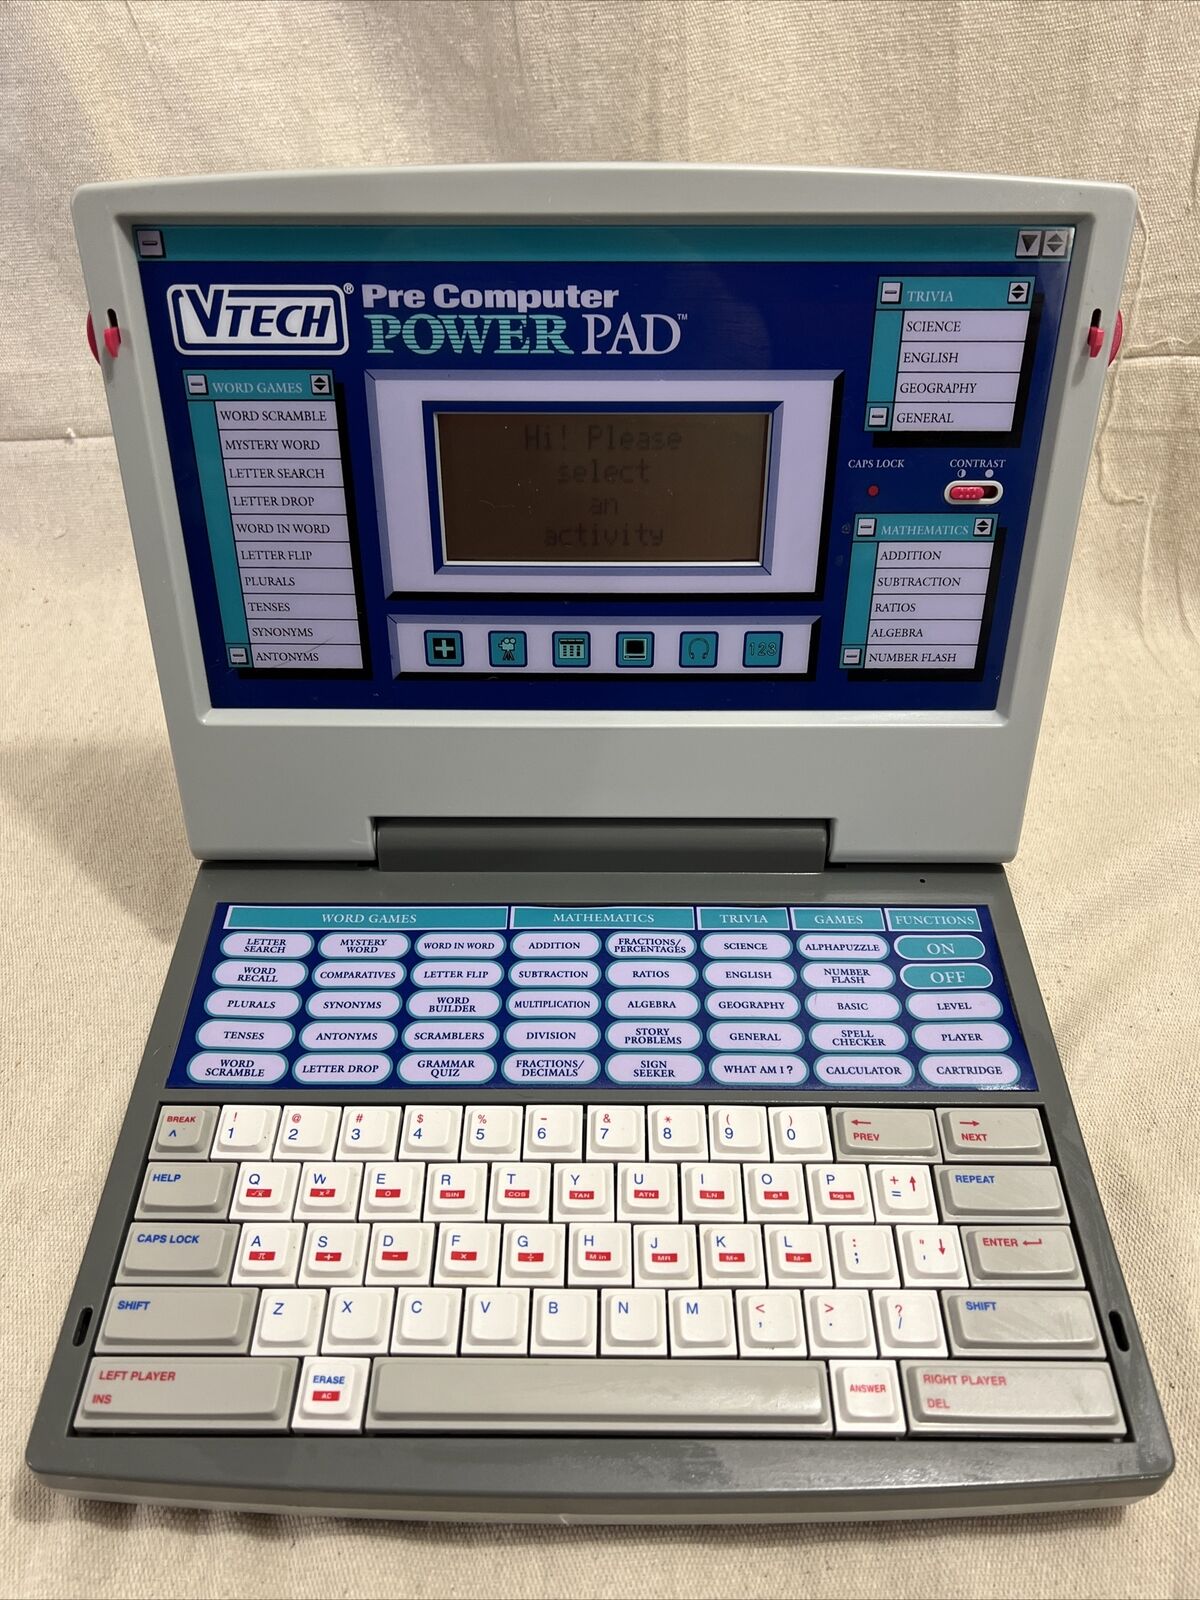 Vintage Vtech Pre Computer Power Pad 1994 Tested Works No Mouse